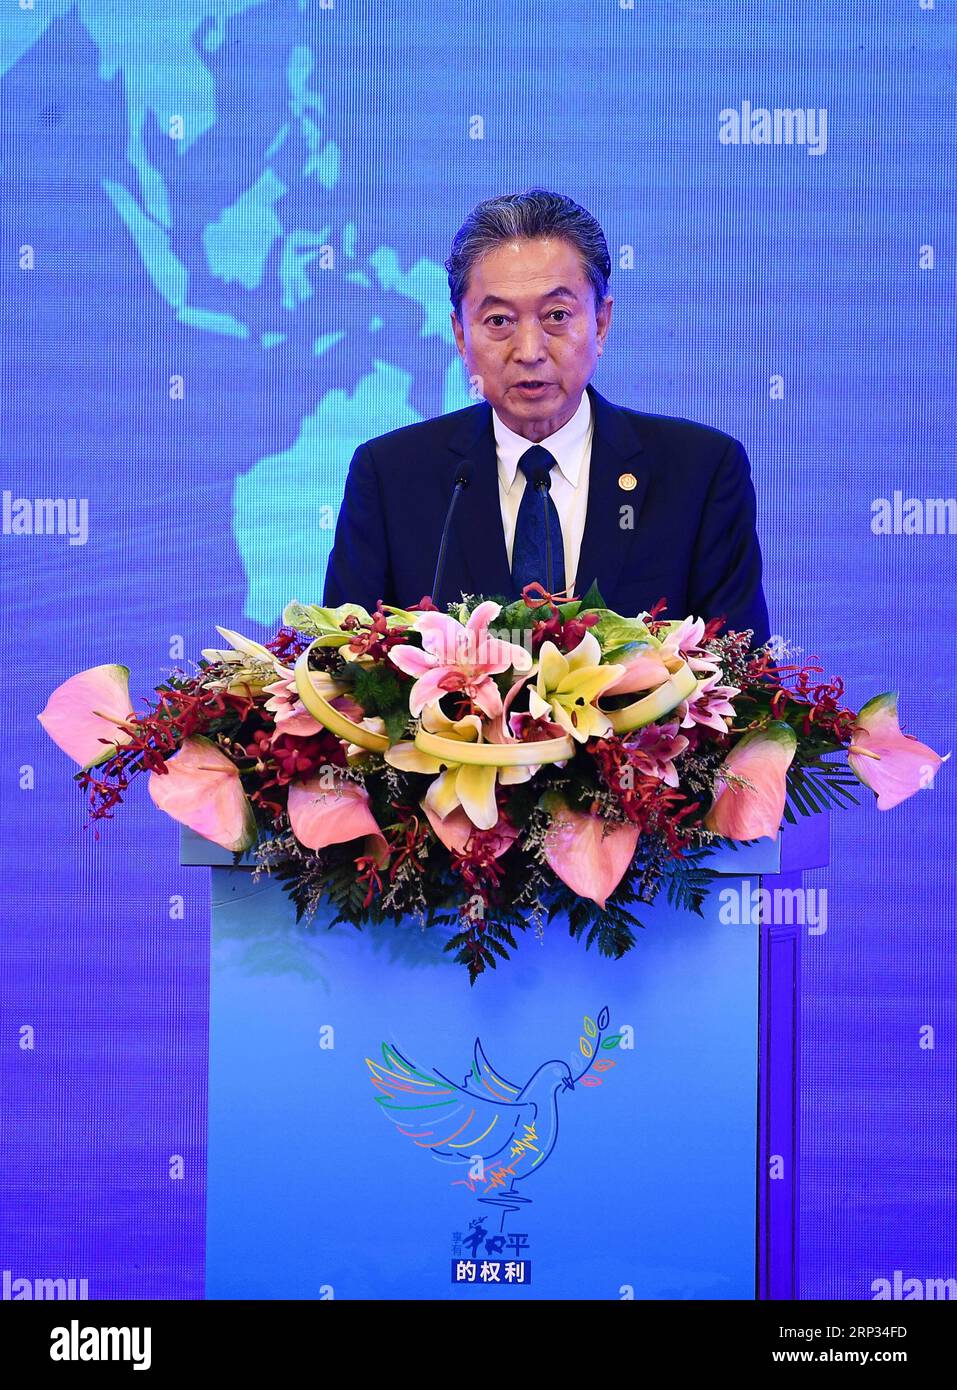 (180919) -- NANJING, Sept. 19, 2018 -- Former Japanese Prime Minister Yukio Hatoyama addresses the opening ceremony of a commemorative event for the International Day of Peace 2018 held in Nanjing, east China s Jiangsu Province, Sept. 19, 2018. ) (lmm) CHINA-NANJING-INTERNATIONAL DAY OF PEACE-COMMEMORATION (CN) LixXiang PUBLICATIONxNOTxINxCHN Stock Photo